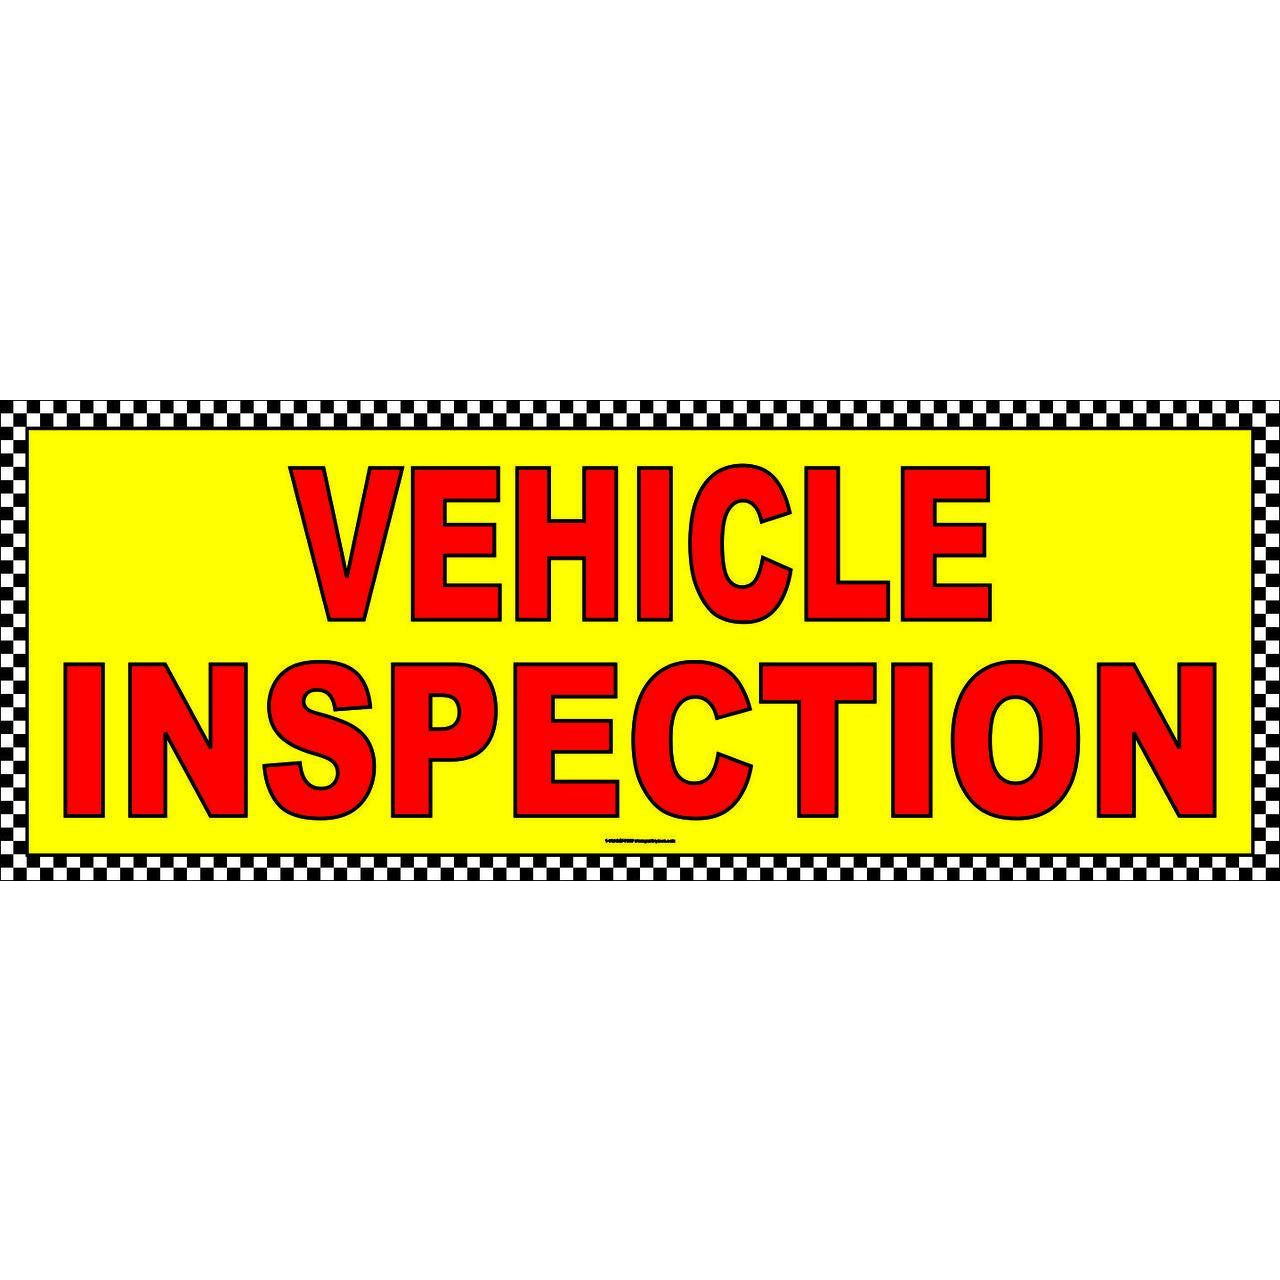 VEHICLE INSPECTION BANNER AB703CHK !!!